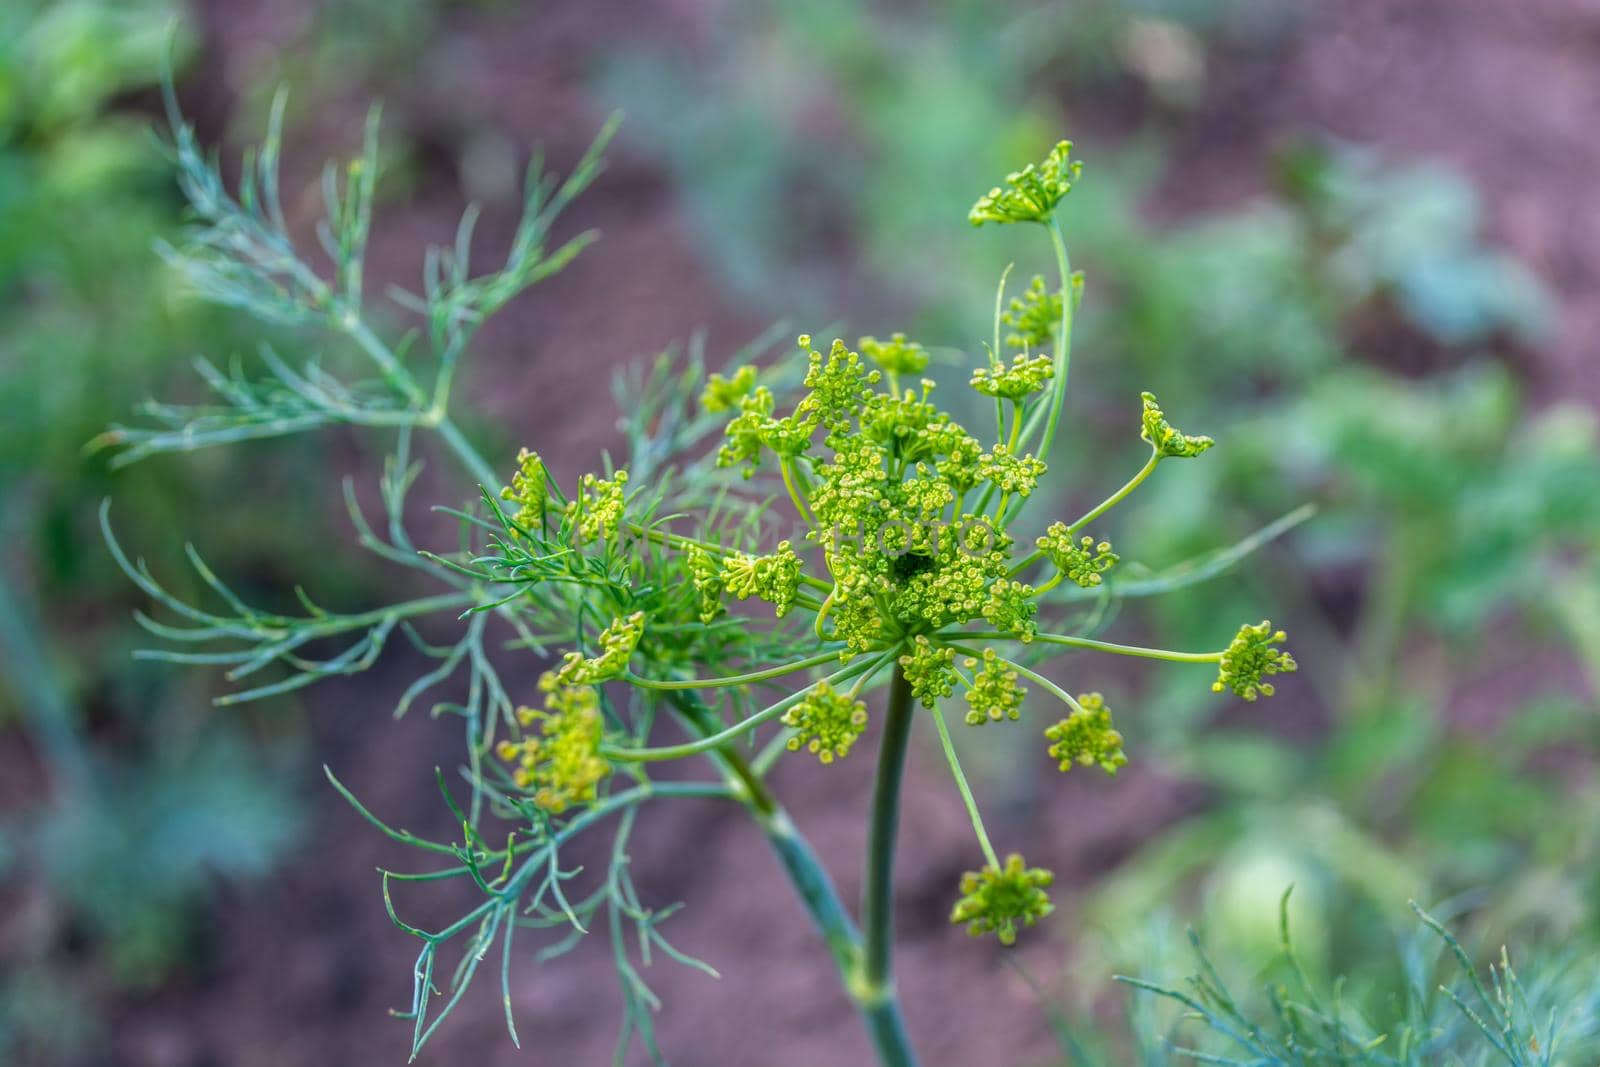 Dill flowers close-up in the vegetable garden. Agriculture.